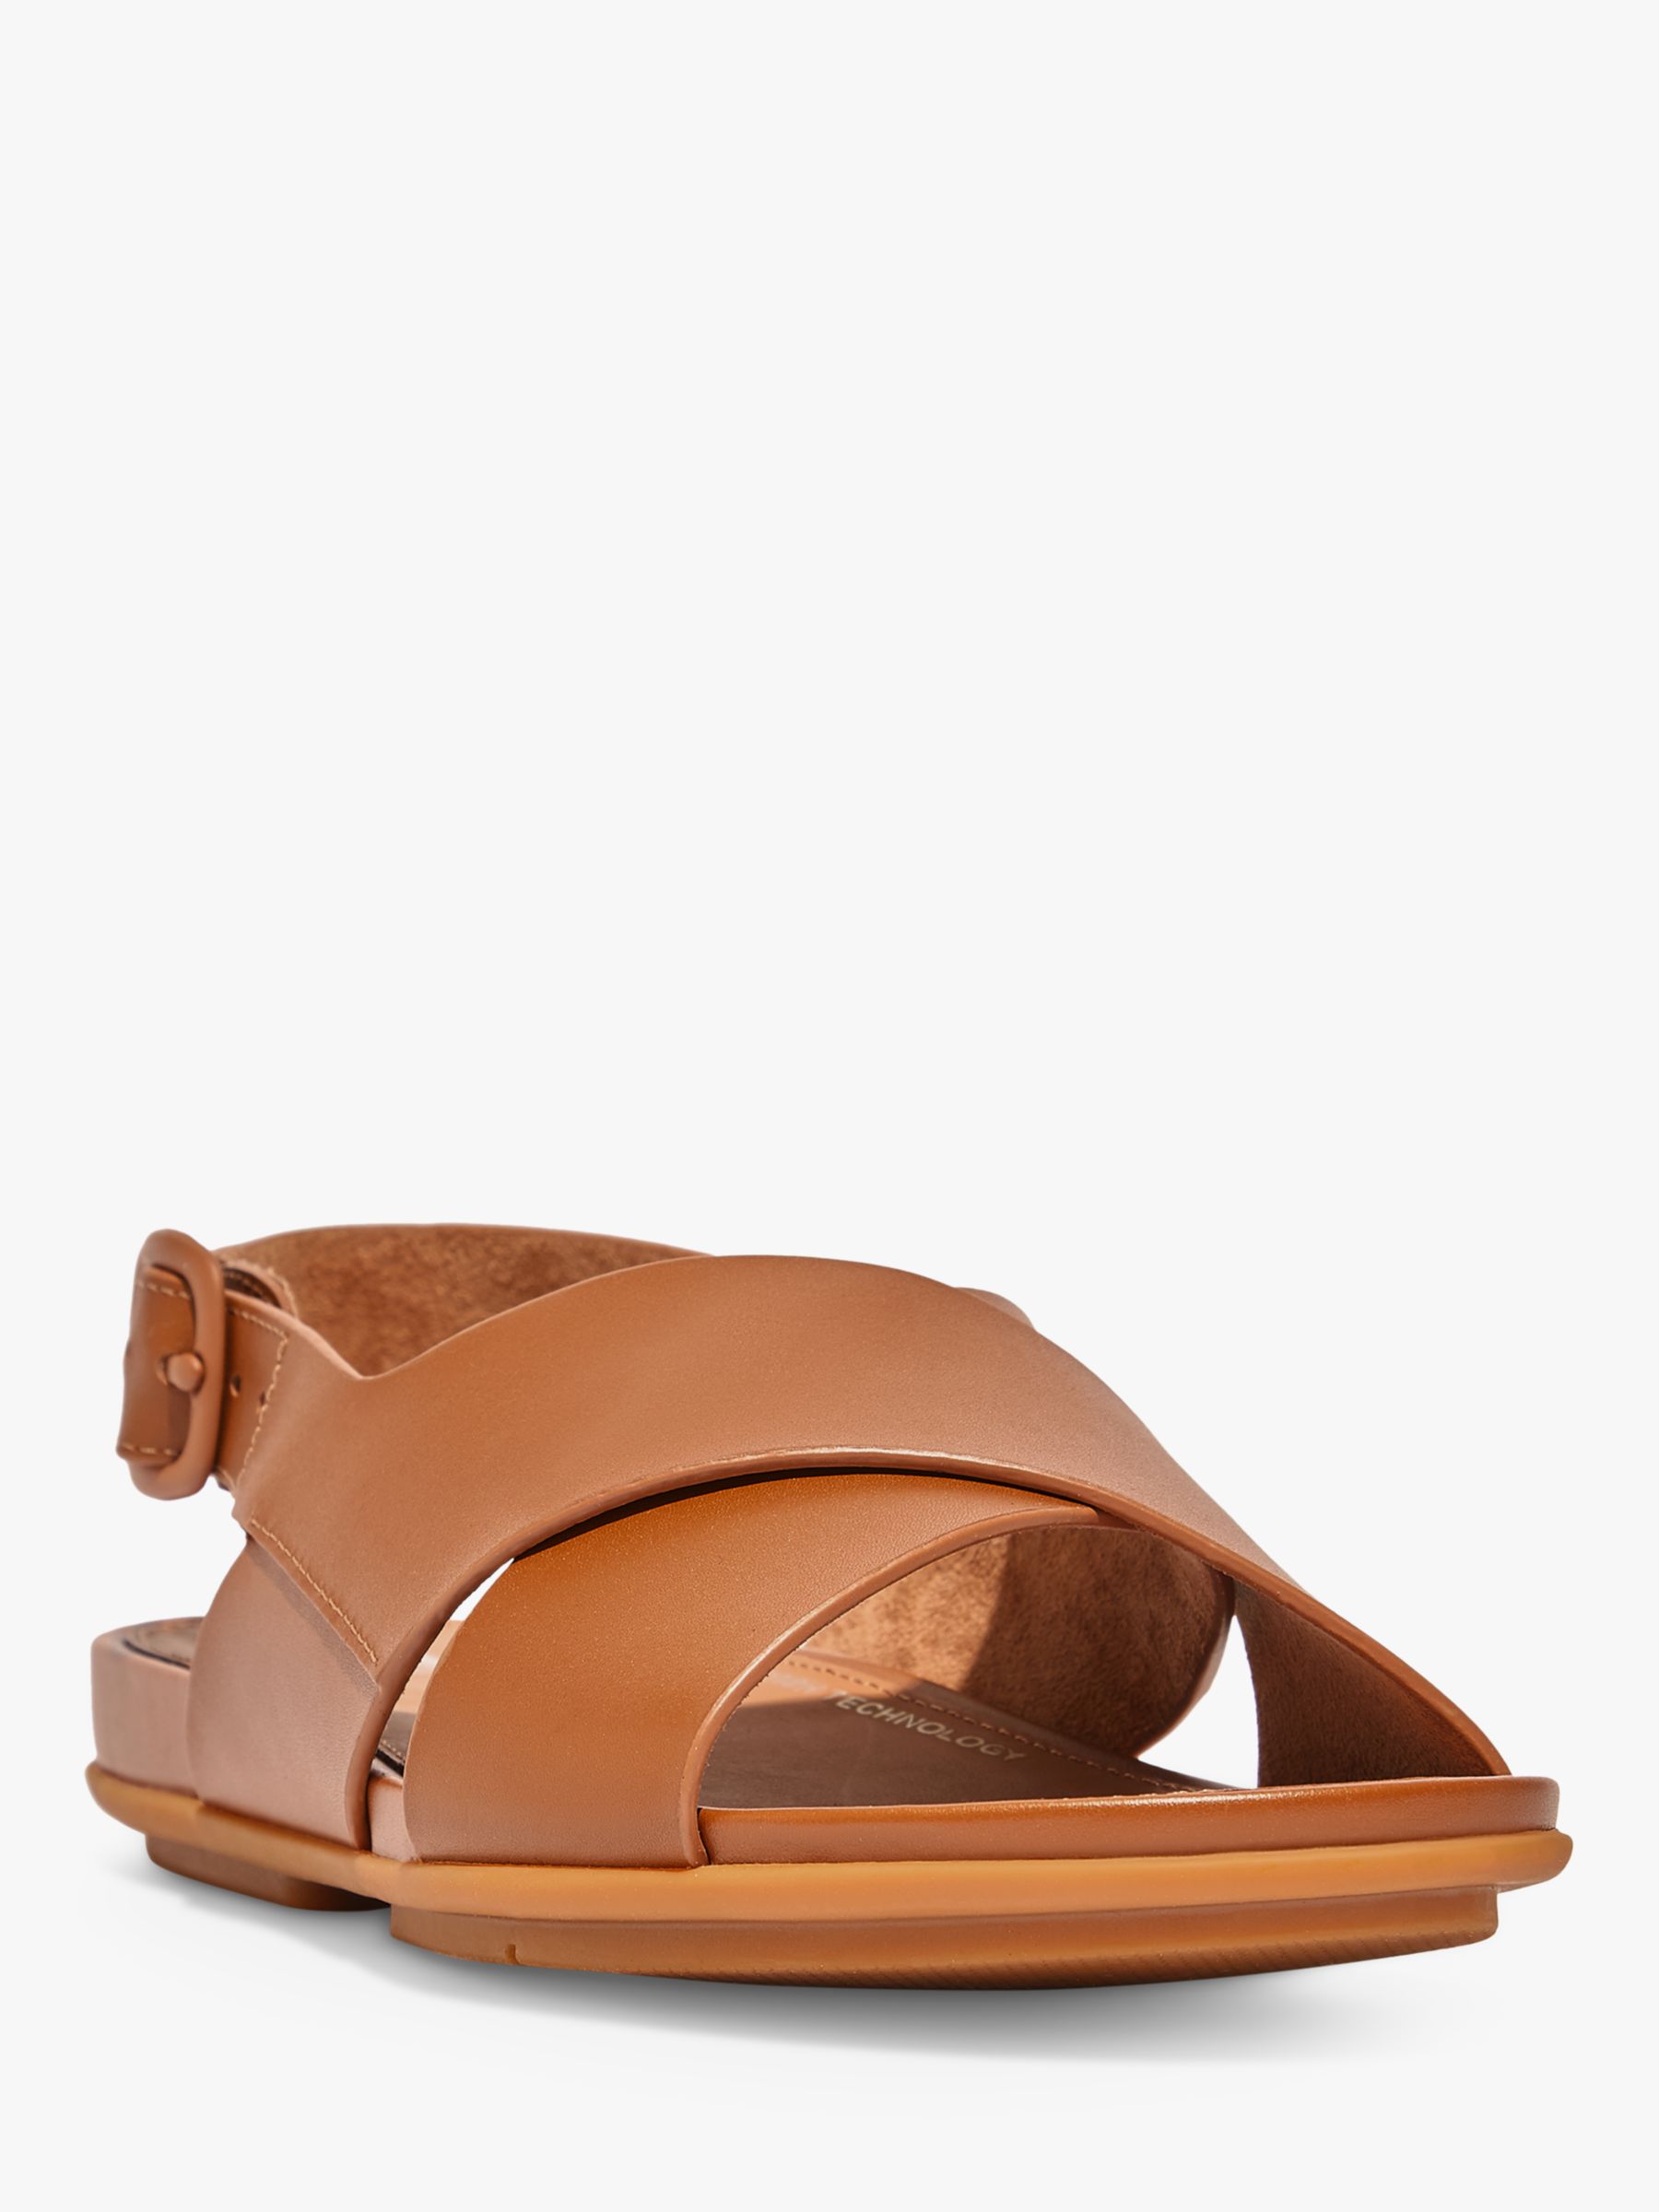 FitFlop Gracie Leather Back Sandals, Light Tan, 3